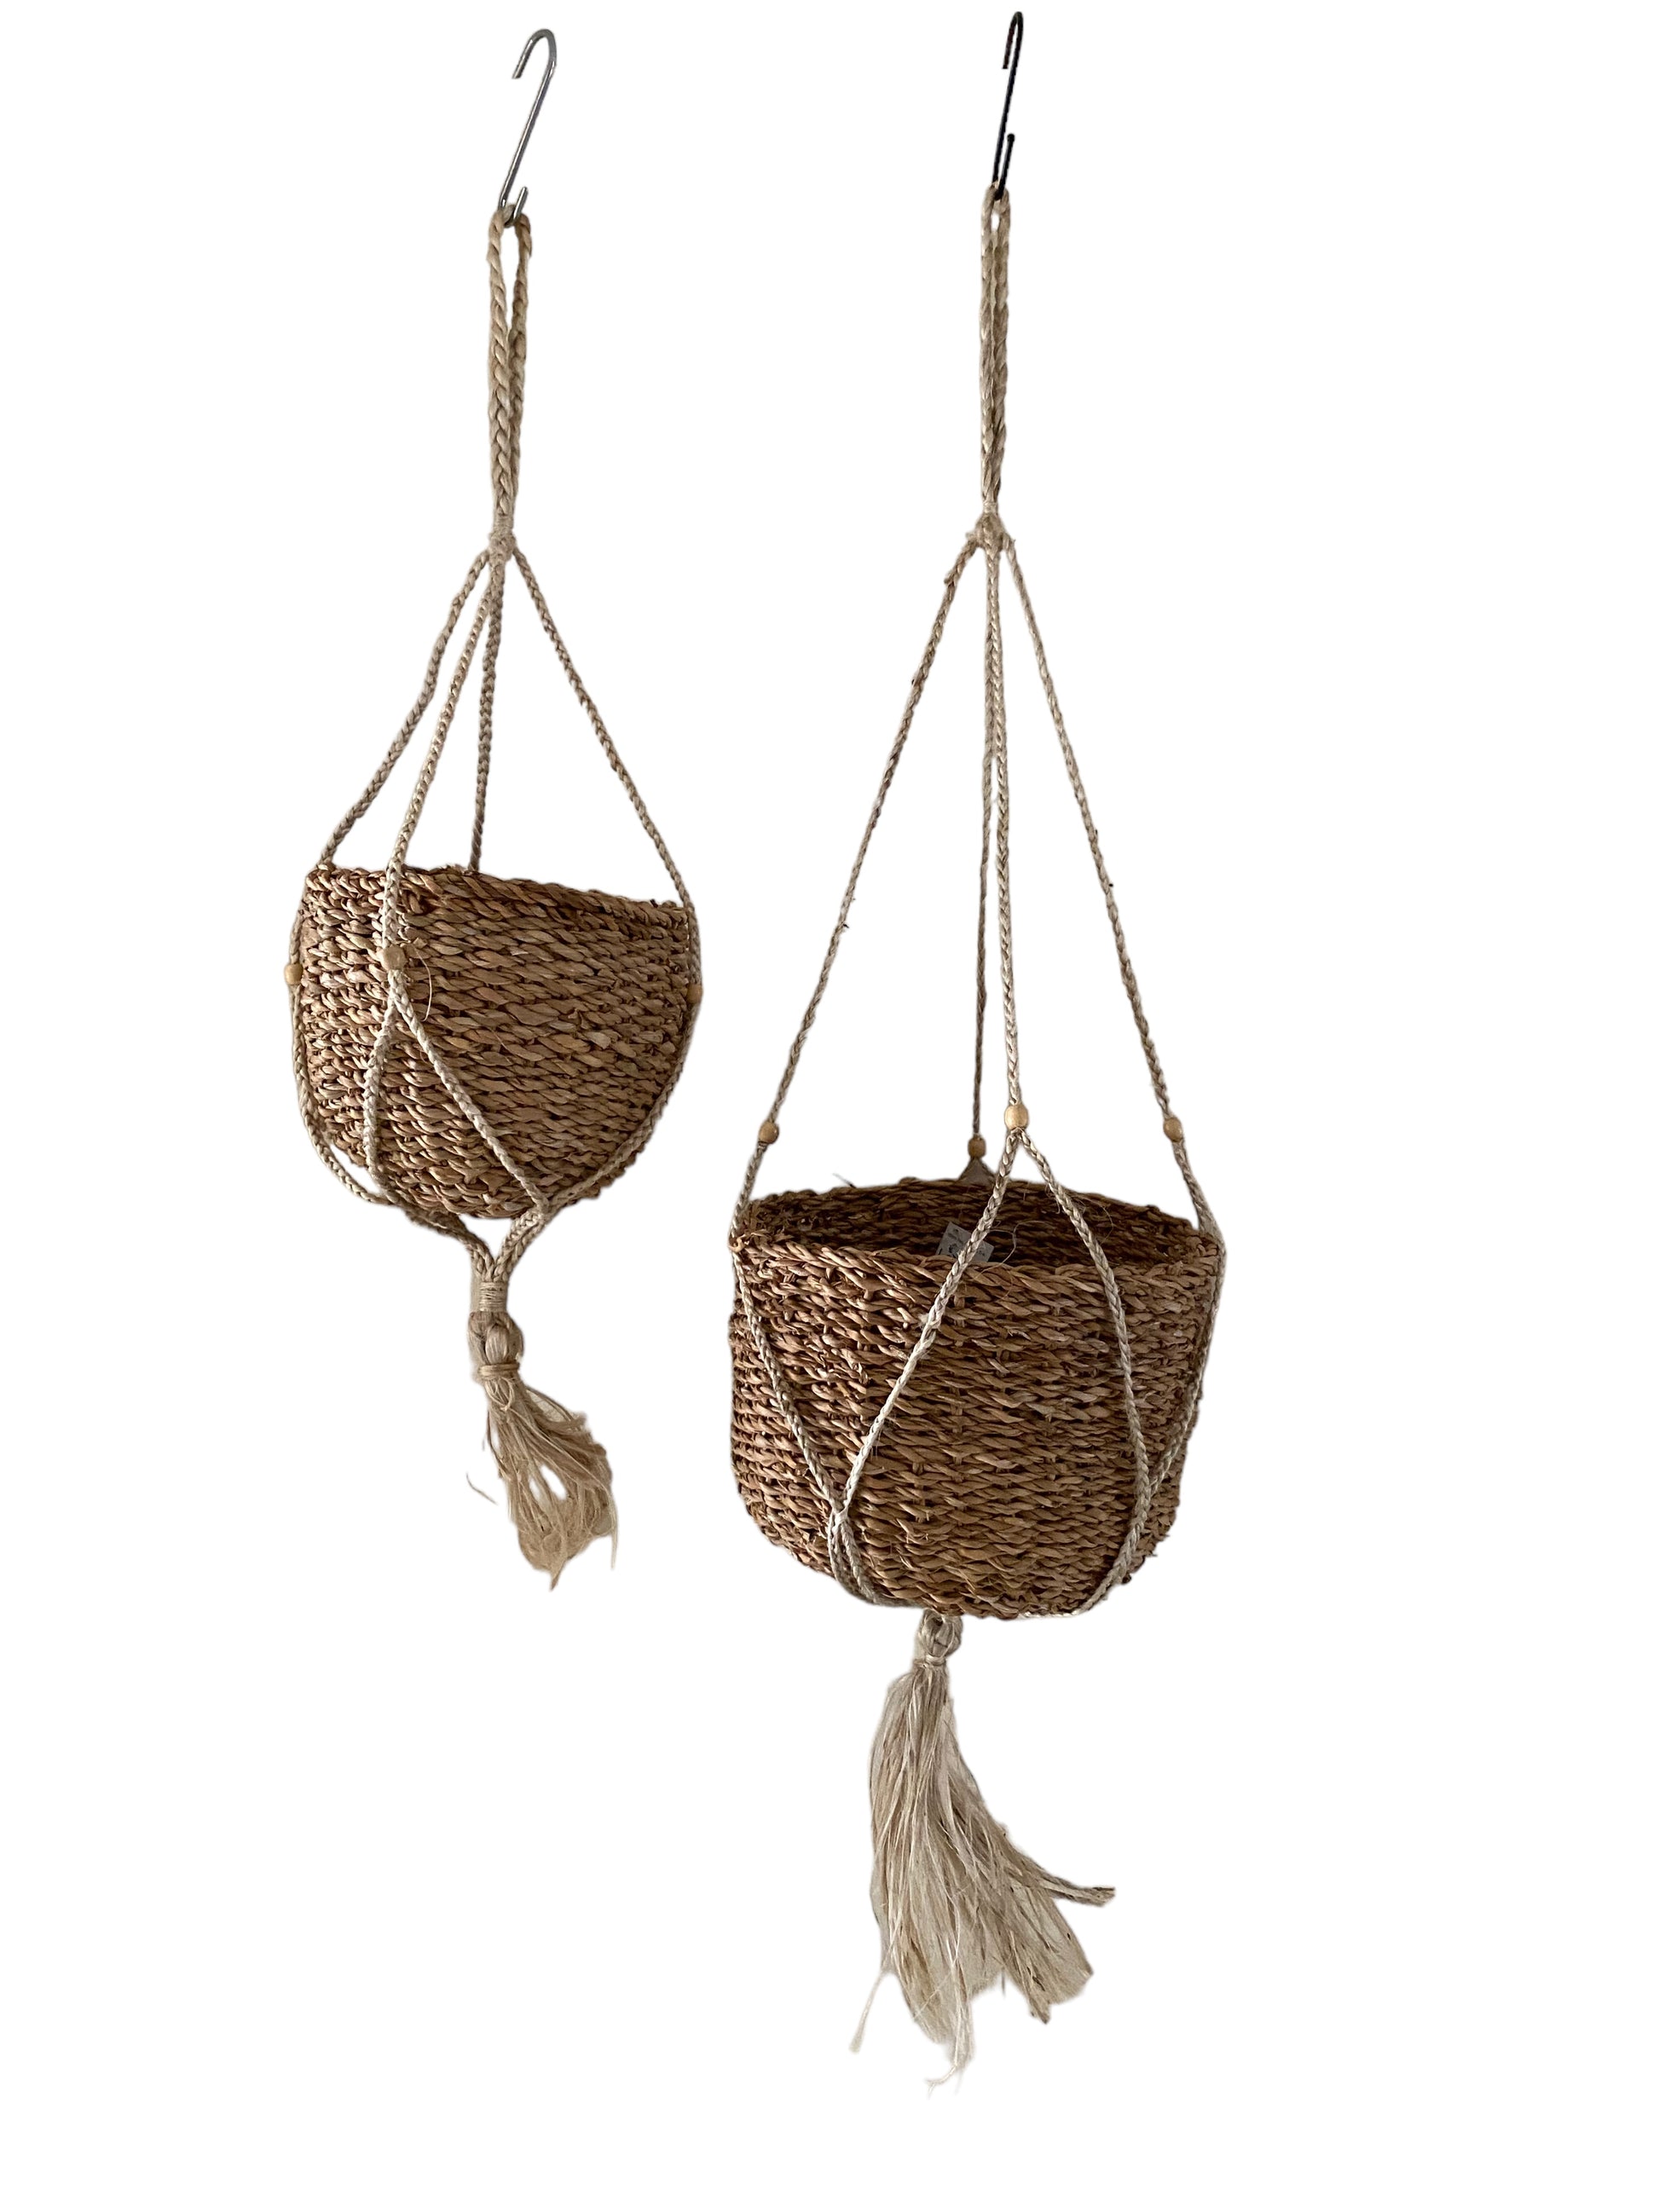 Pot Planter Plant Basket Set of 2 Hanging - The Renmy Store Homewares & Gifts 